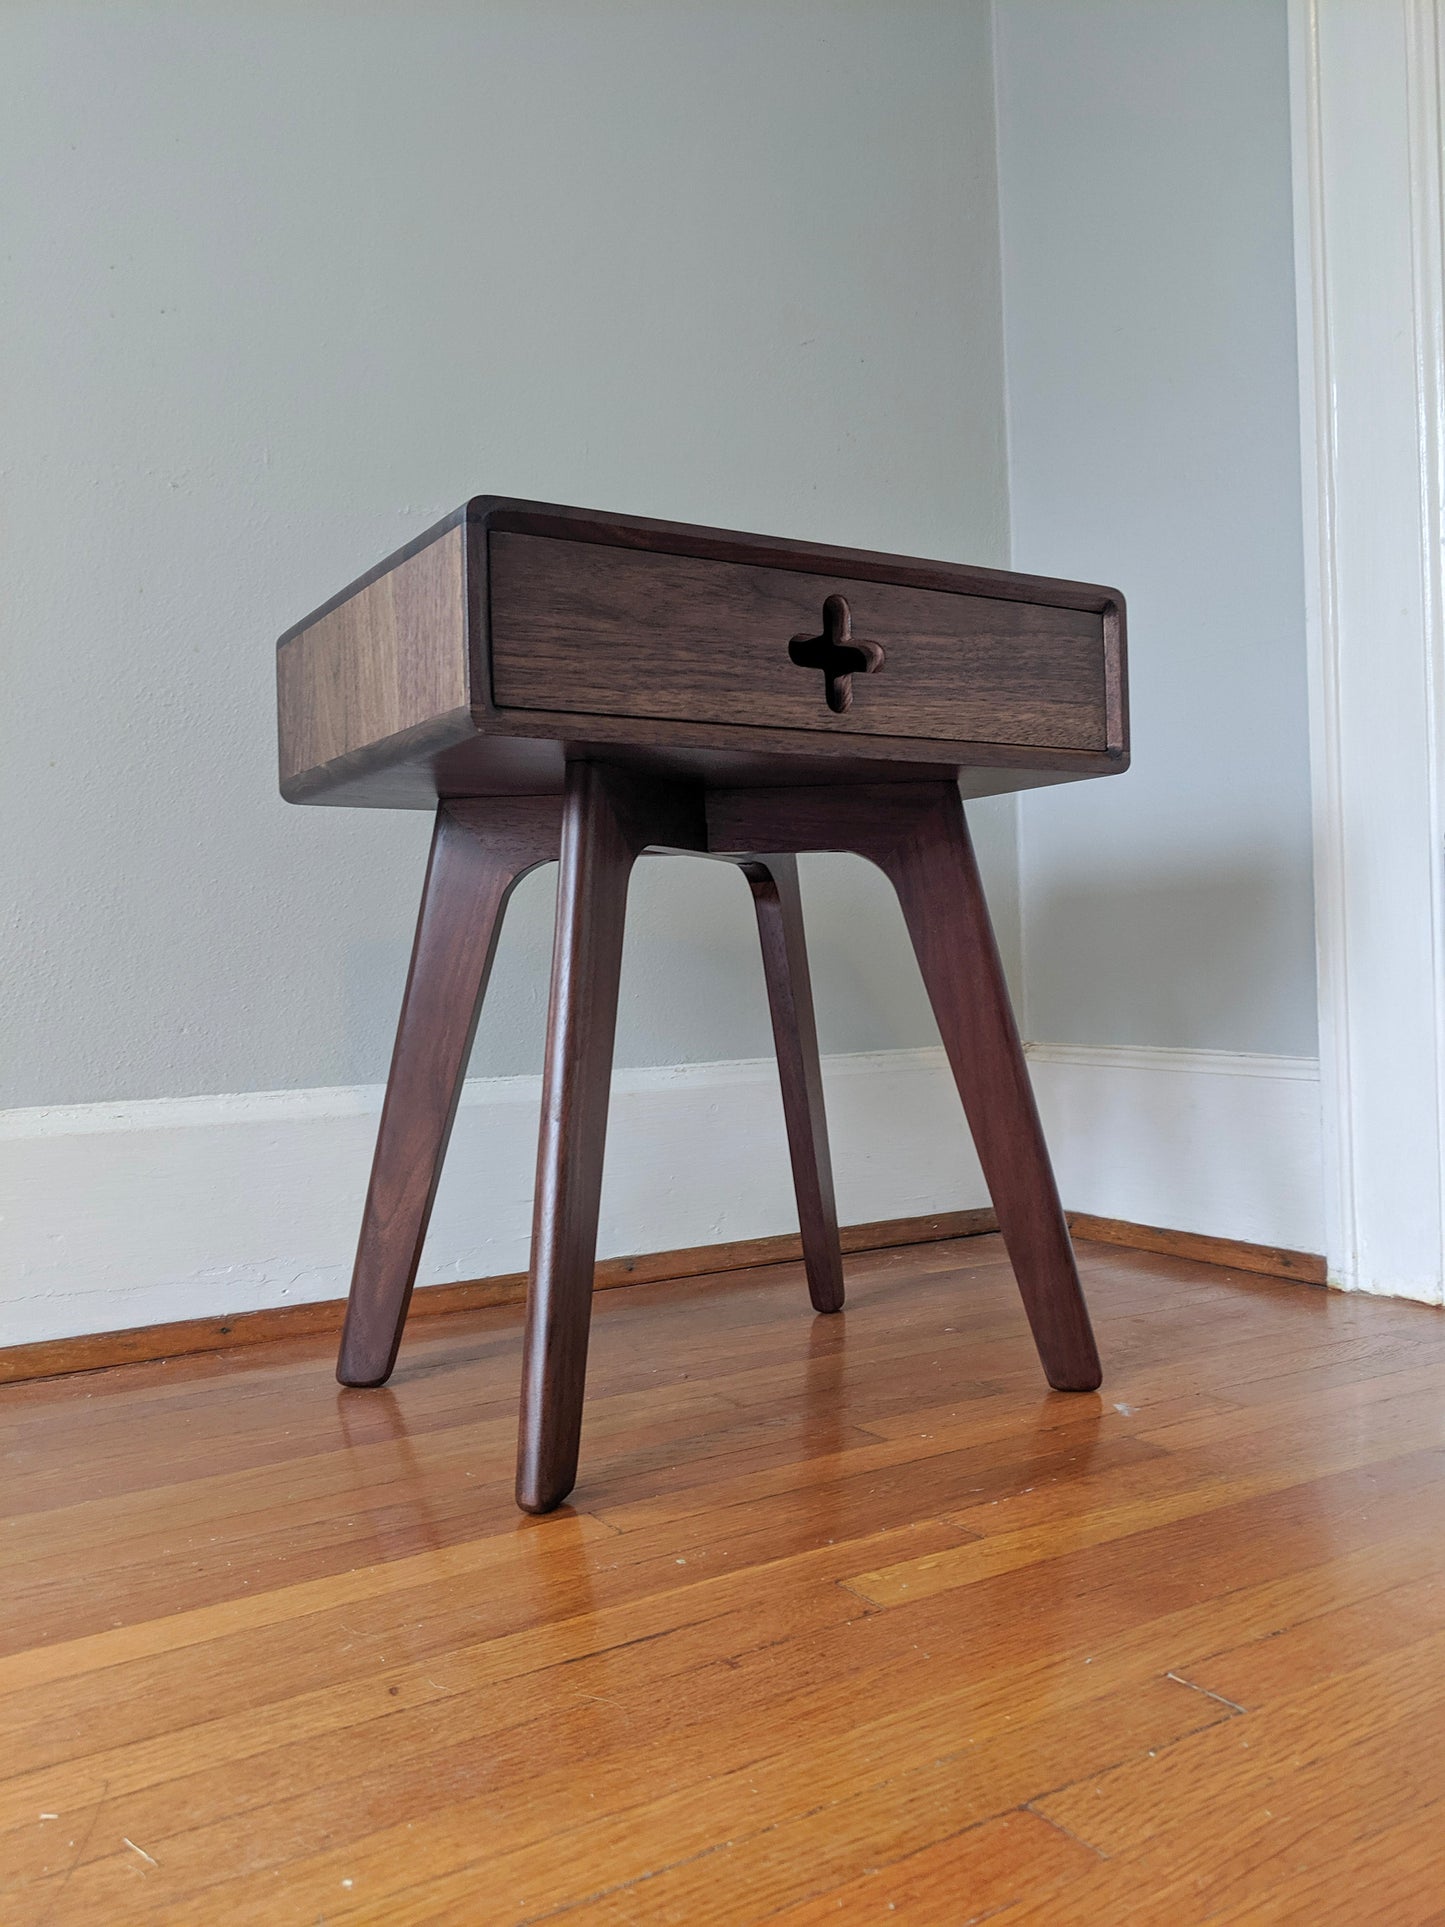 Nightstand Plus - Midcentury Walnut Bedside Table, Modern End Table in walnut, Danish Accent Table